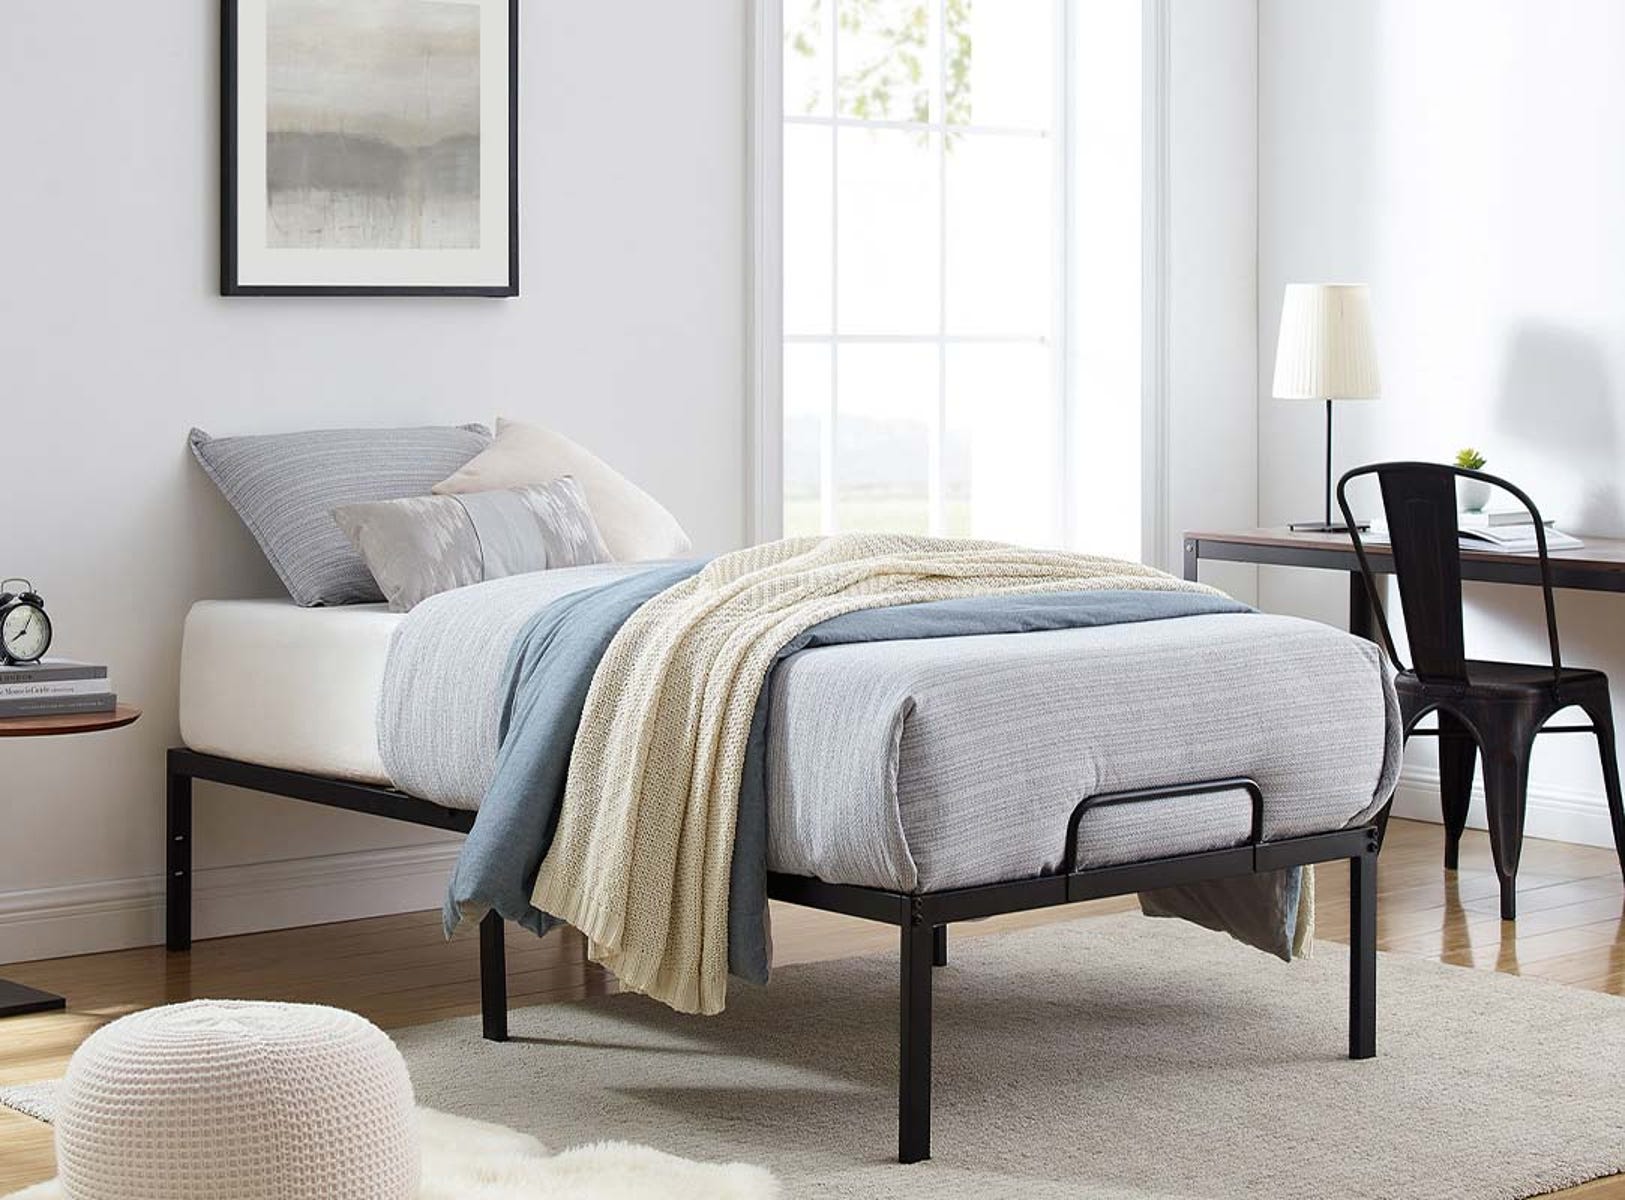 best place to buy bed frame and mattress